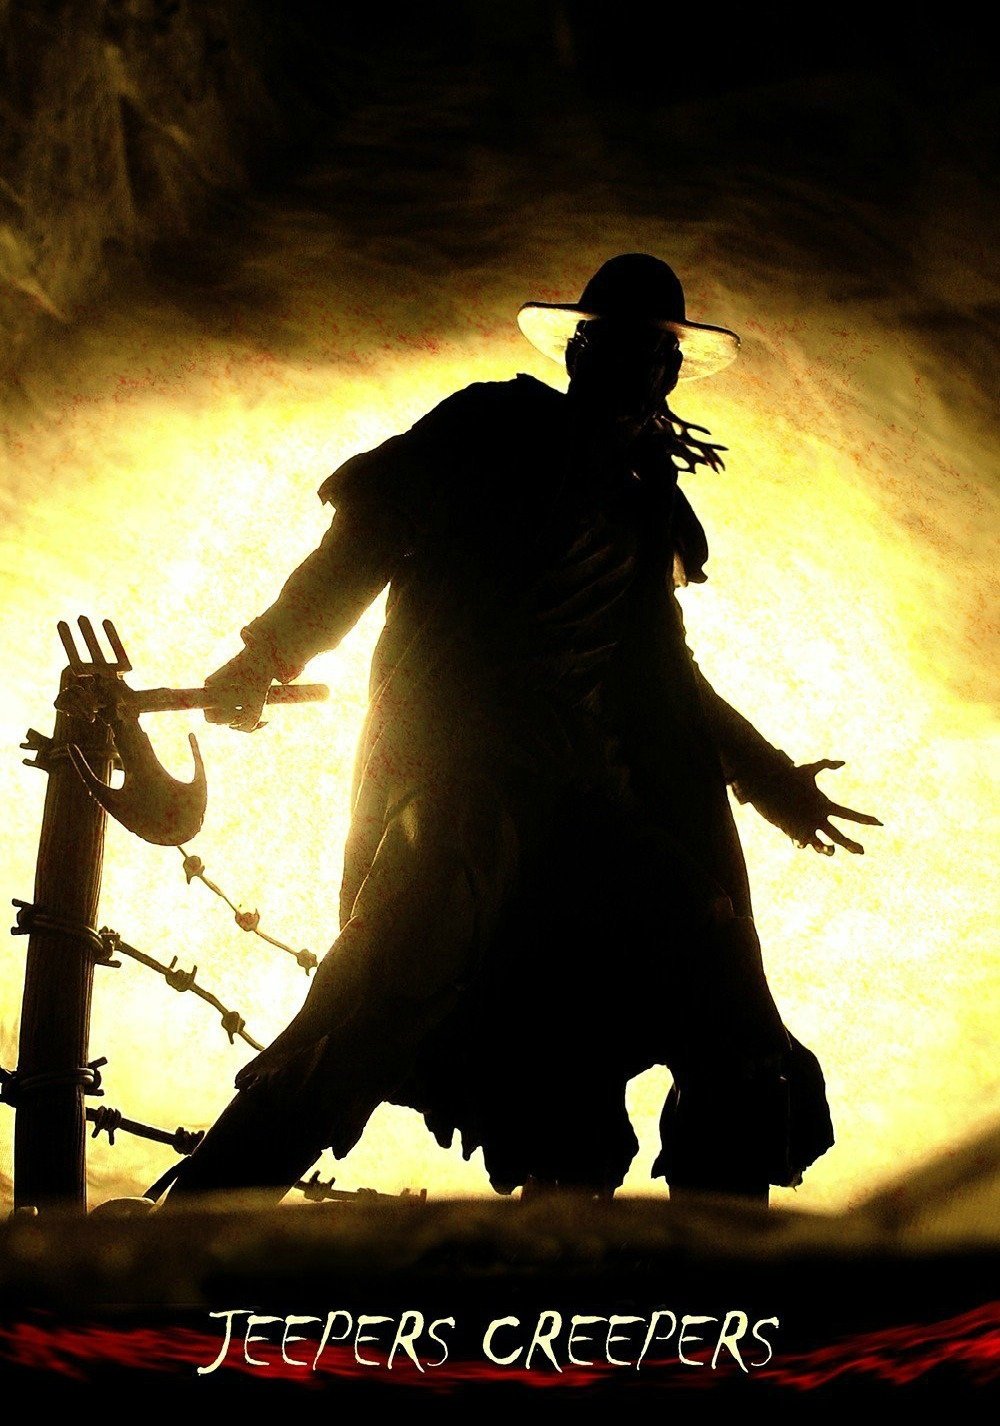 jeepers creepers full movie hd